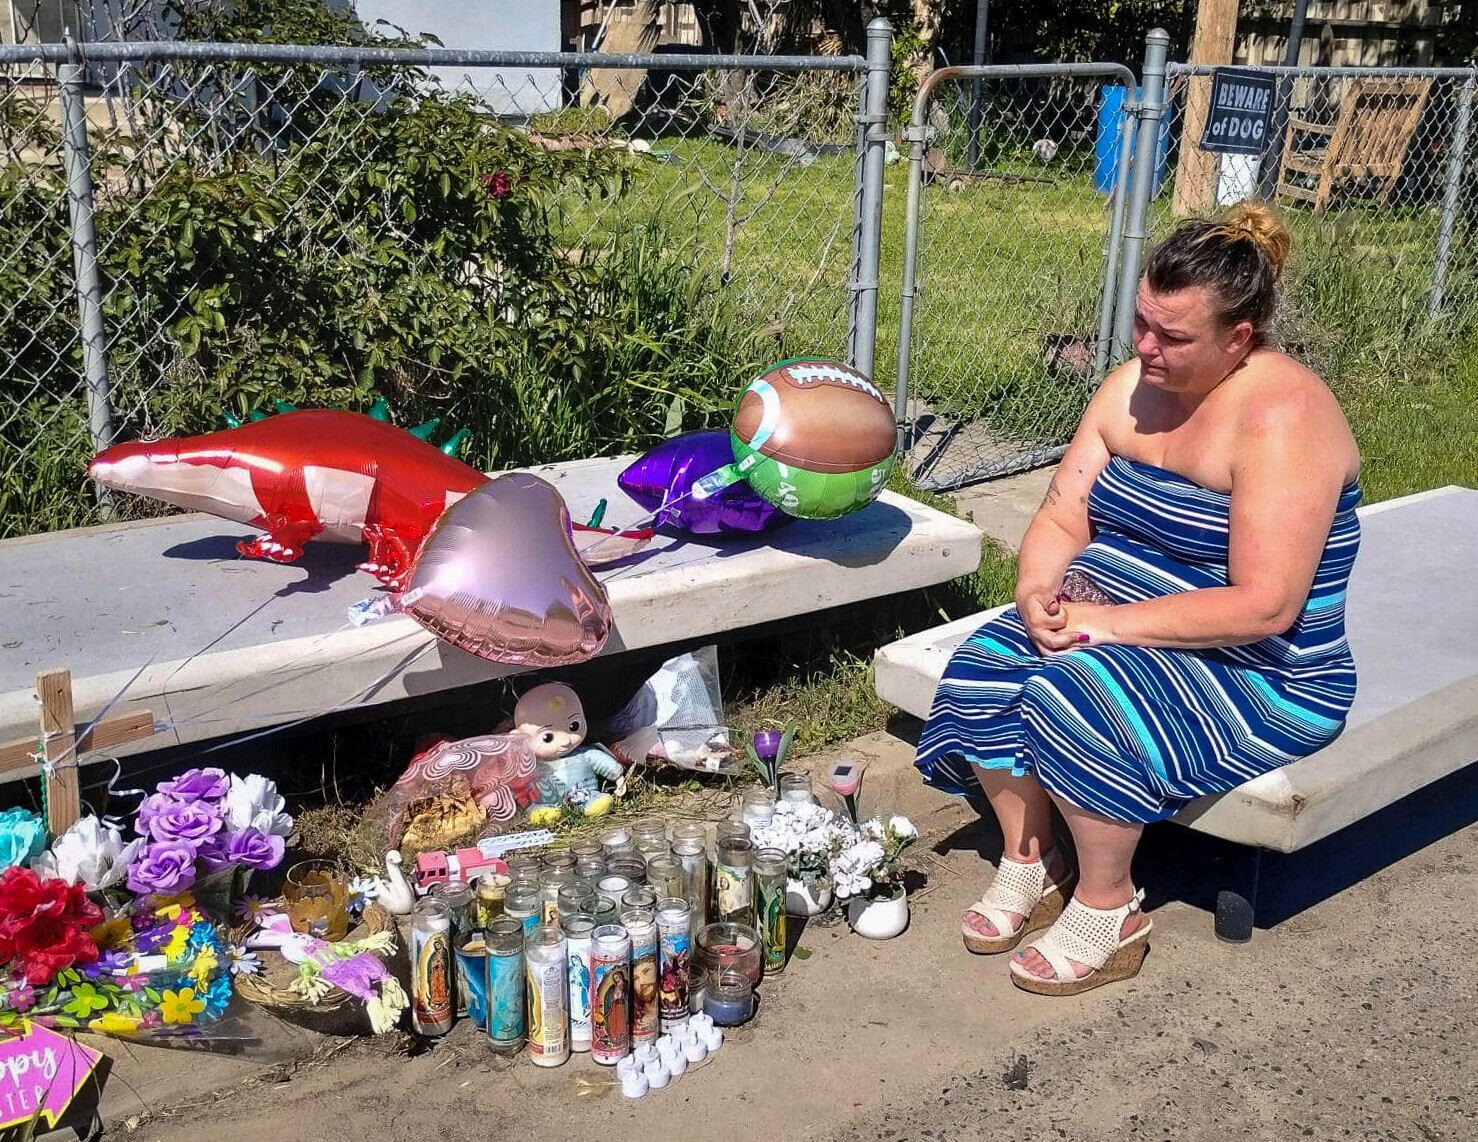 A woman sits at a memorial site where her loved ones were shot and killed. Votive candles, purple and red bouquets, balloons, and a wooden cross are all positioned on a dirt sidewalk in front of a chain link fence. The woman sits on an abandoned mattress as she stares solemnly at the display.